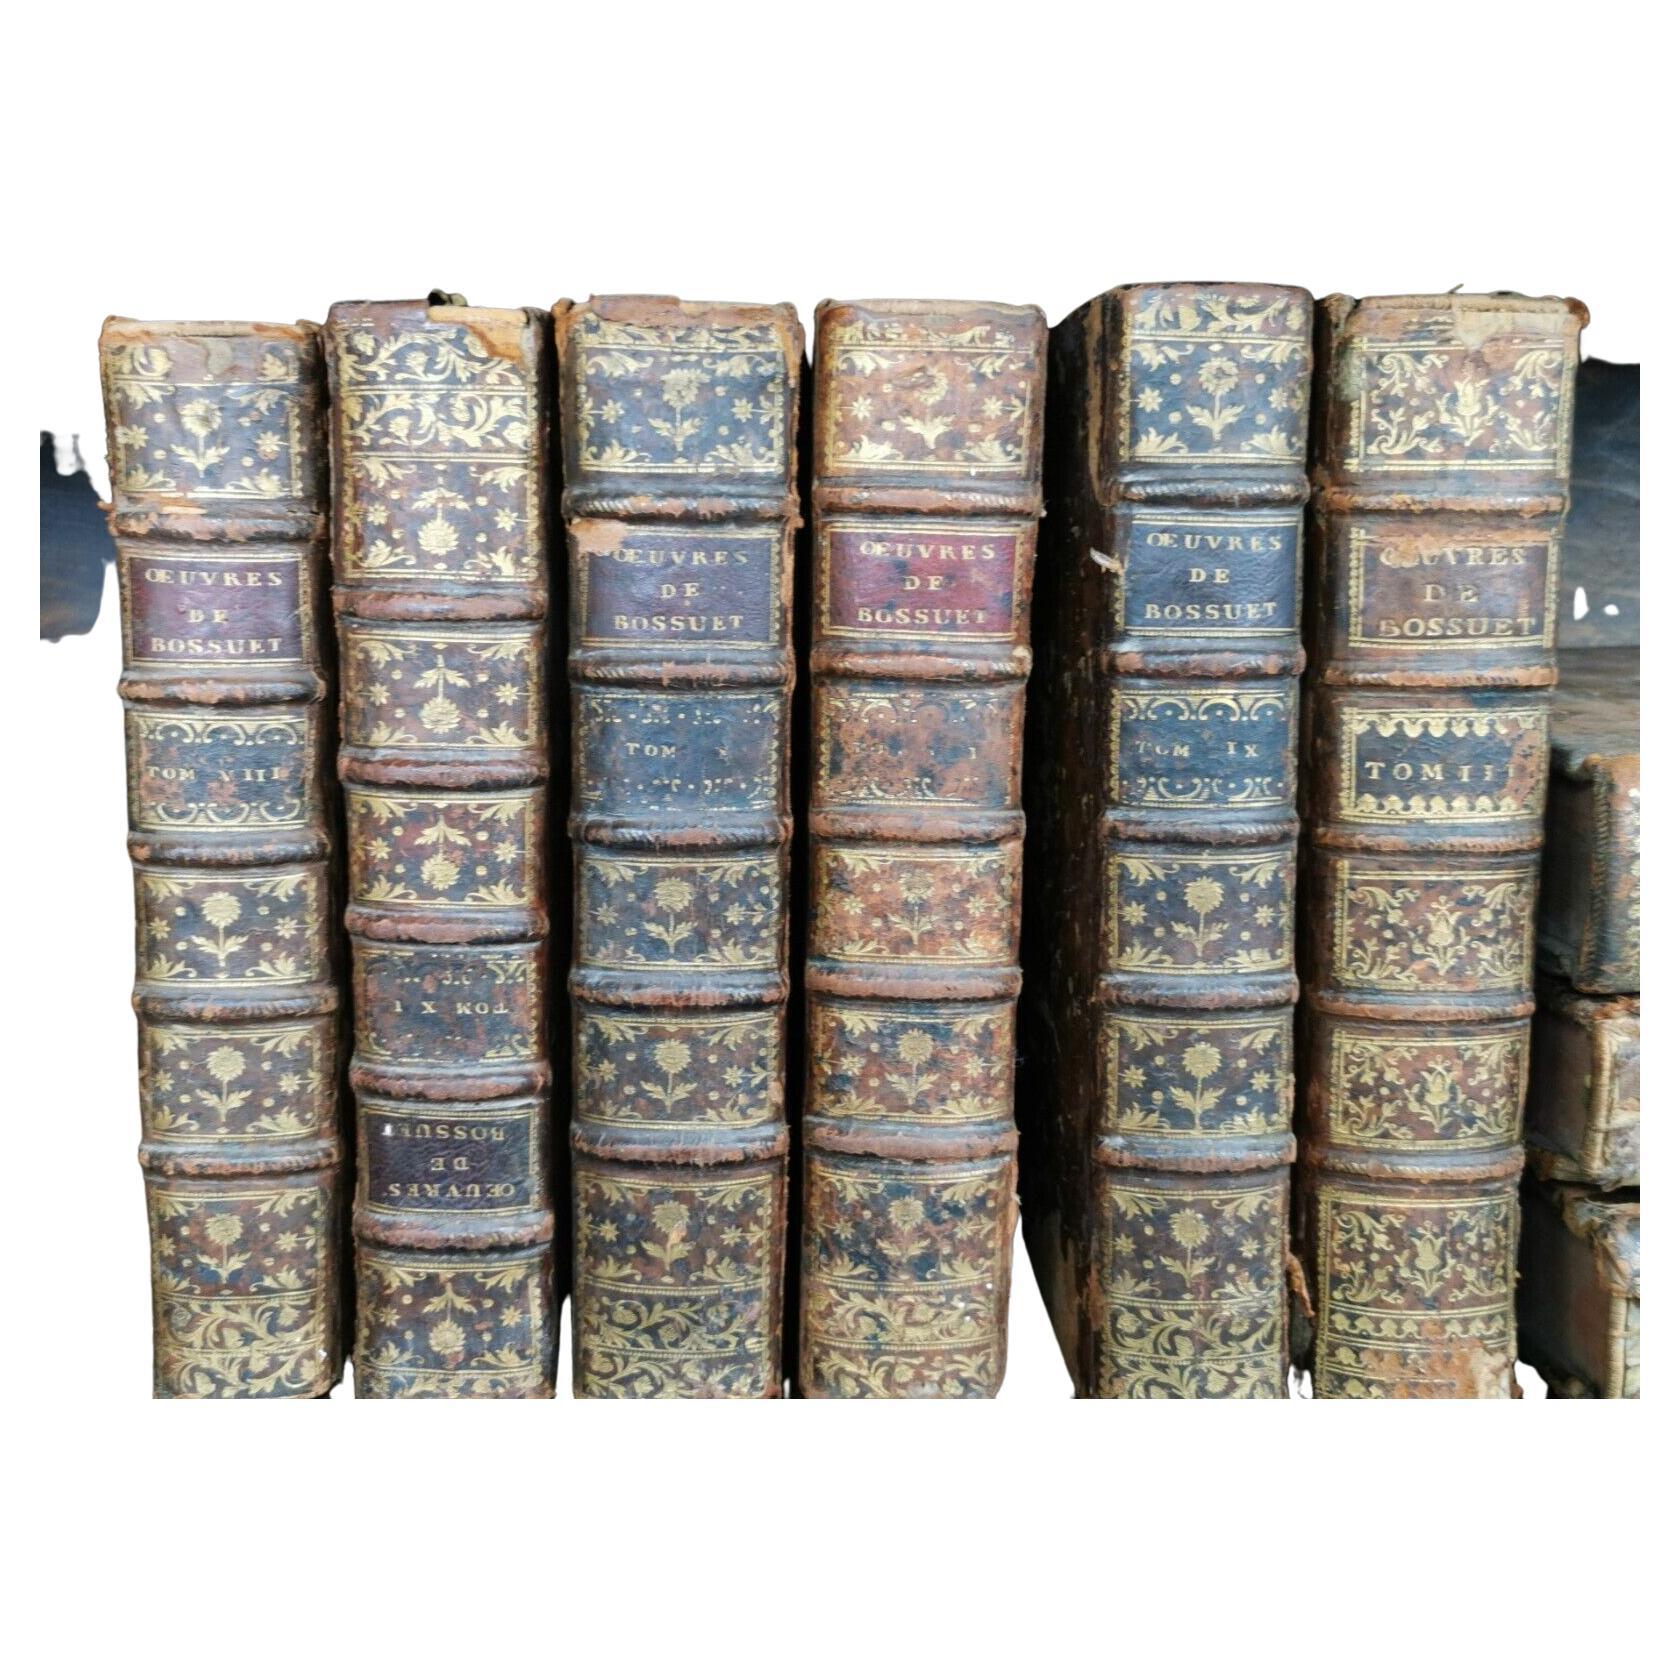 Twelve Decorative Uniformly Bound 18th Century French Antique Display Books  For Sale at 1stDibs